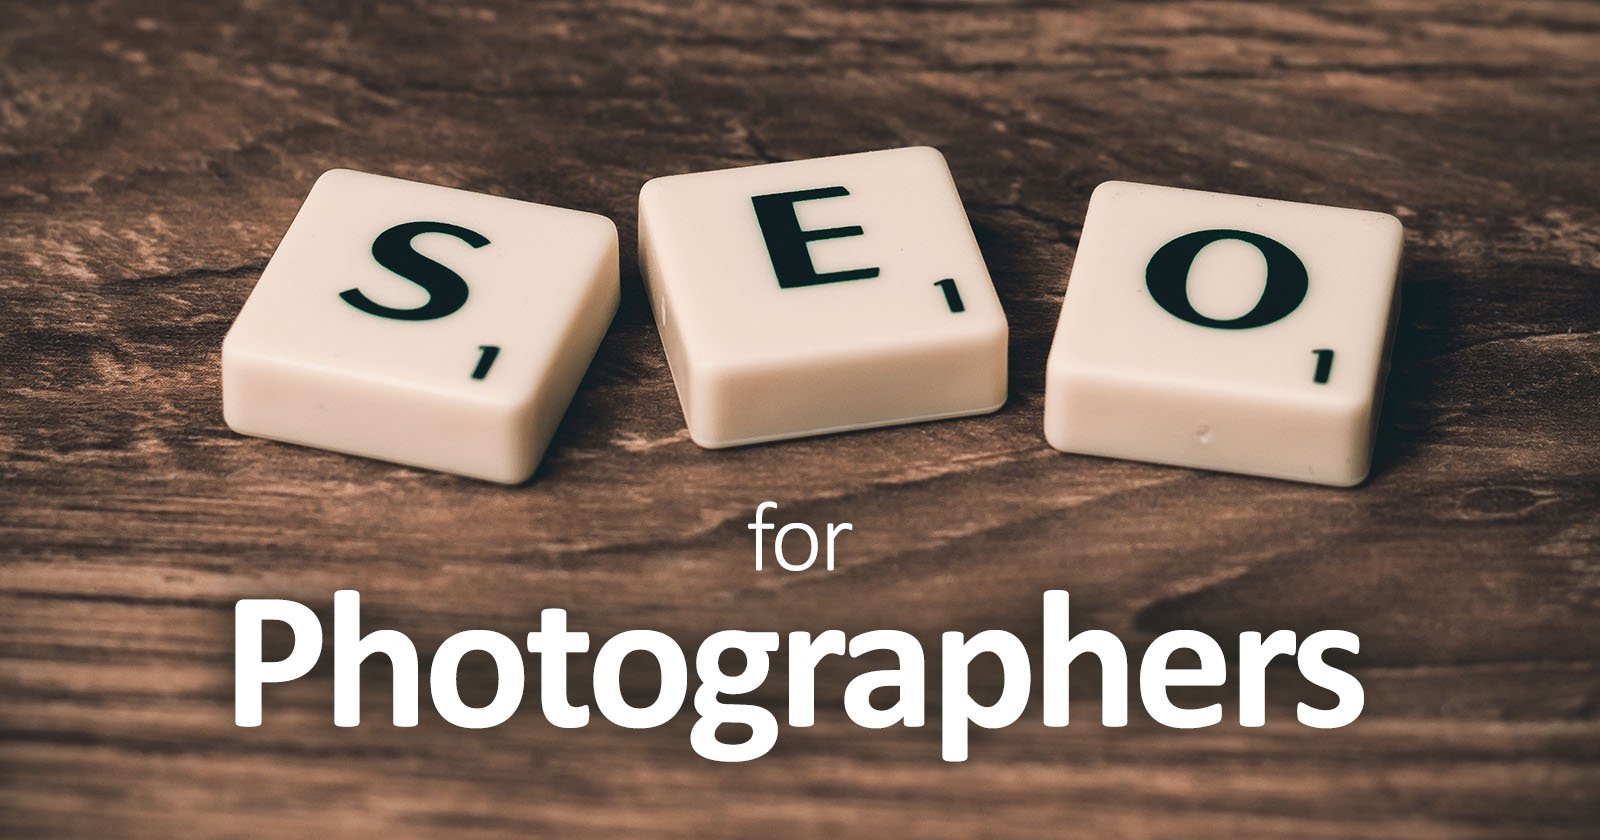 5 SEO Pro Tips for Your Photo Website